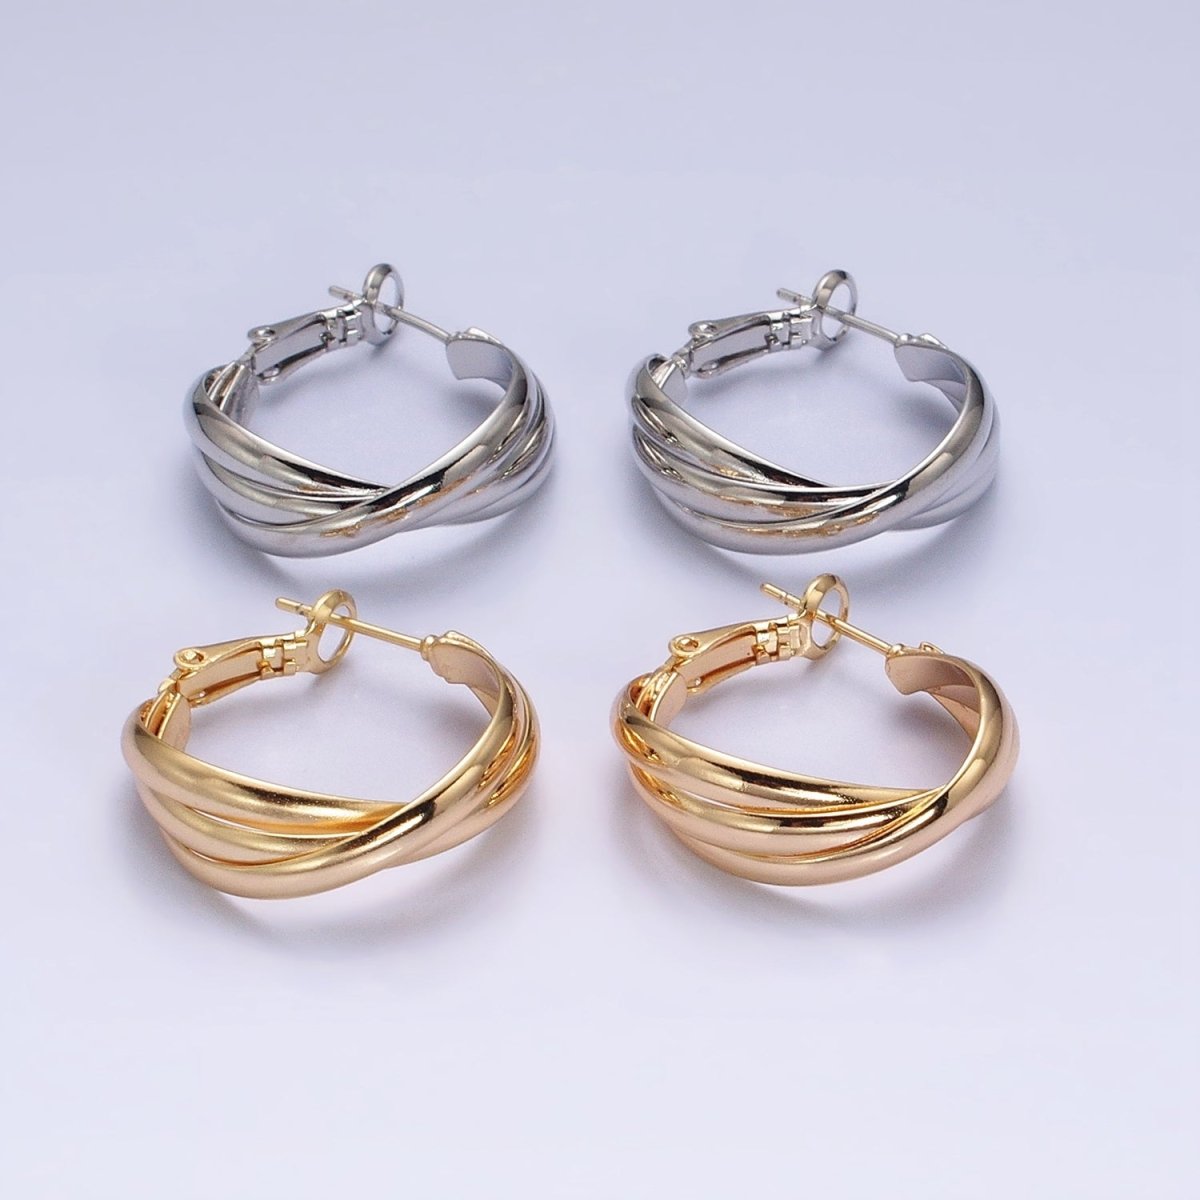 16K Gold Filled 25mm Triple Flat Bar Band X Hinge Hoop Earrings in Gold & Silver | AD1291 AD1292 - DLUXCA